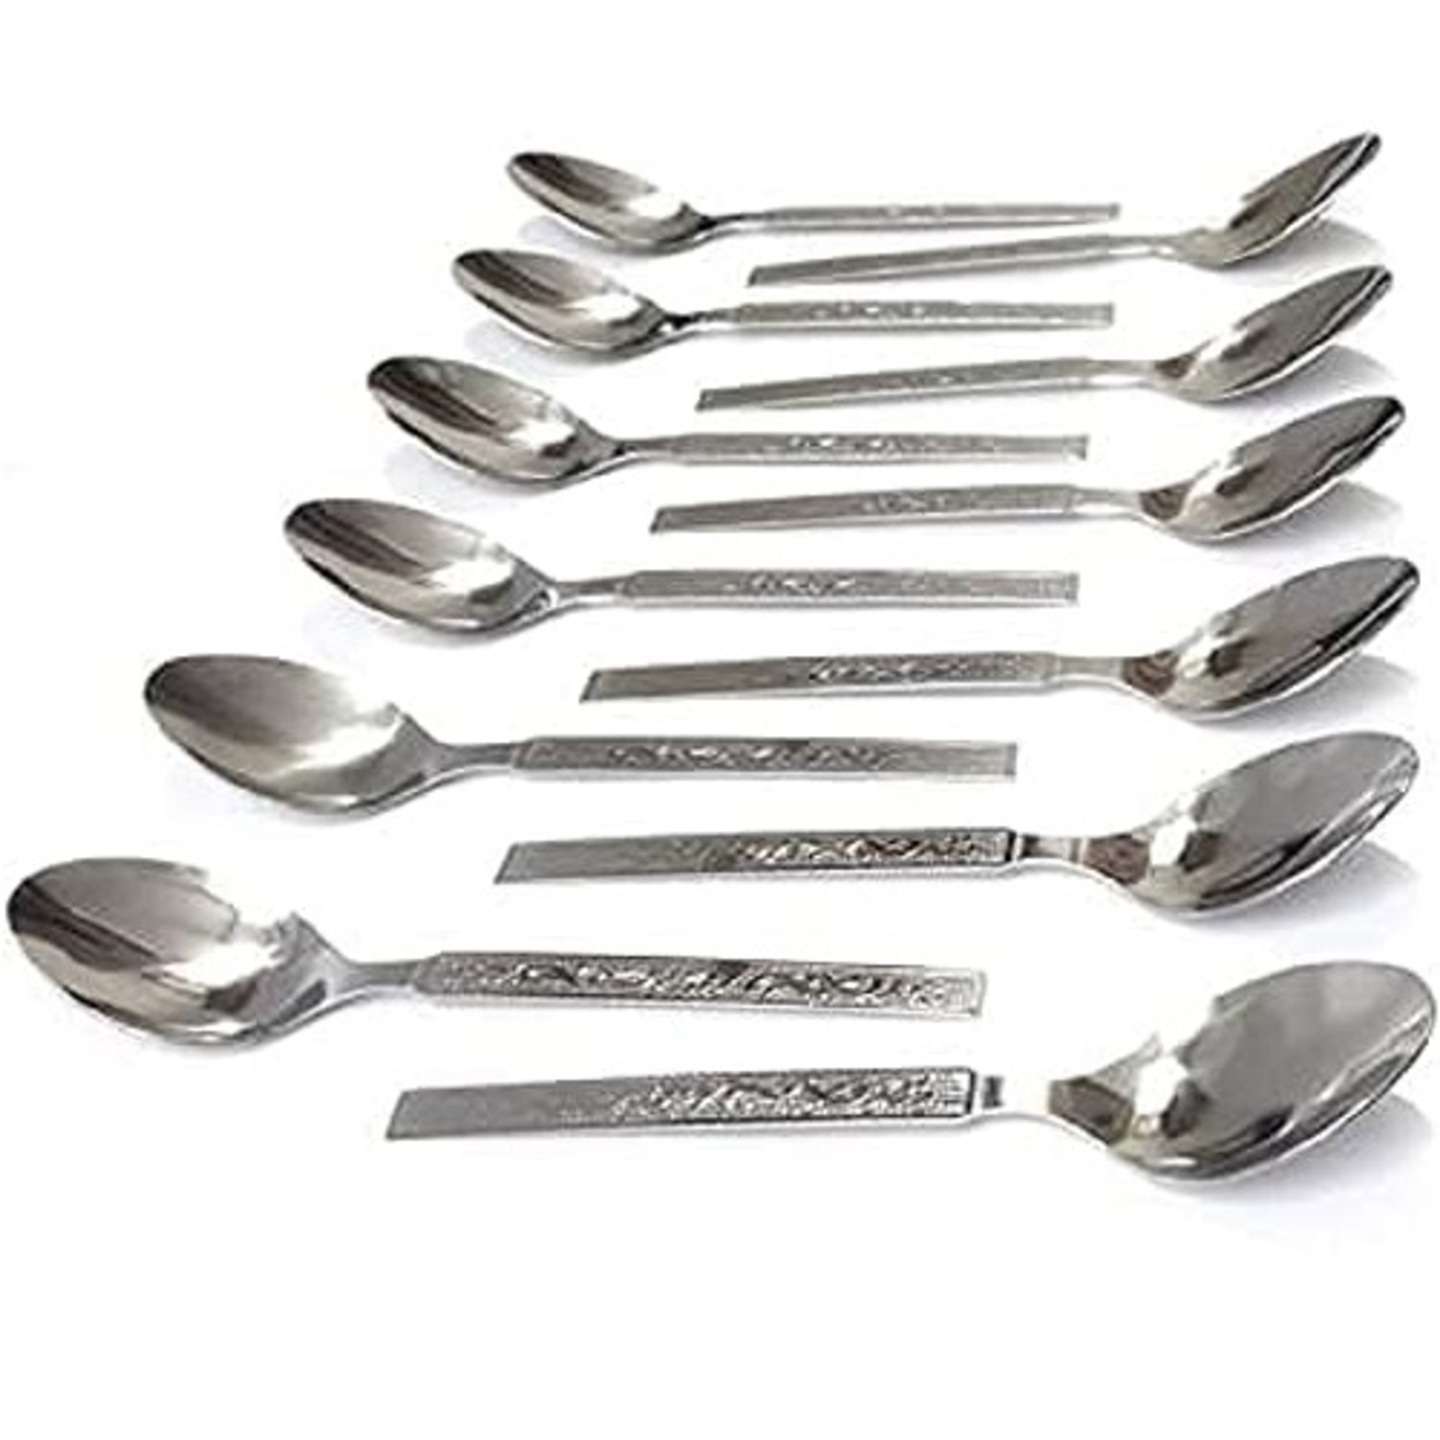 Set of 12 Stainless Steel Table Spoons